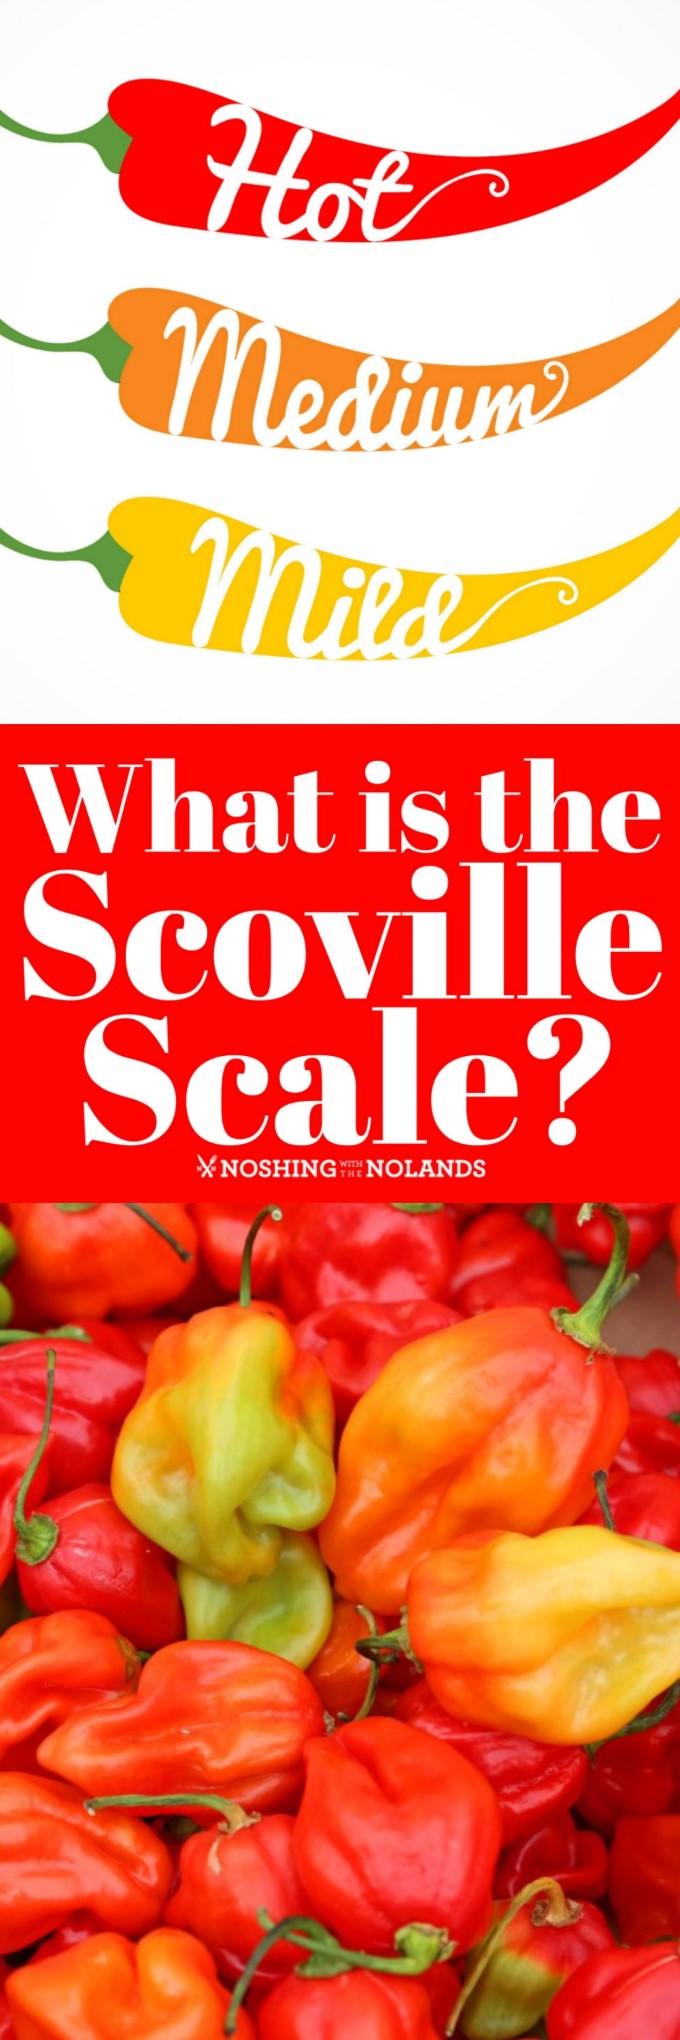 What is the Scoville Scale? Learn all about the ranking of peppers and their heat content. #scovillescale #peppers #hotpeppers